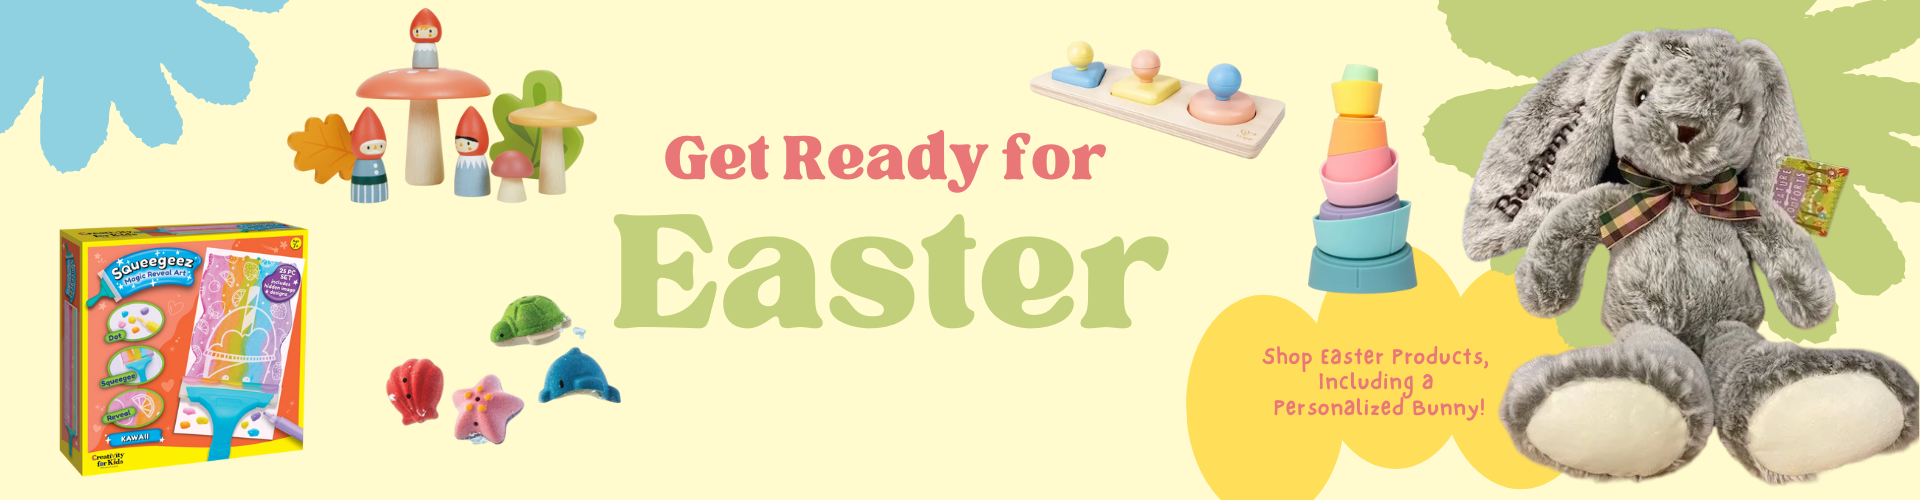 Get Ready for Easter_1920 x 500